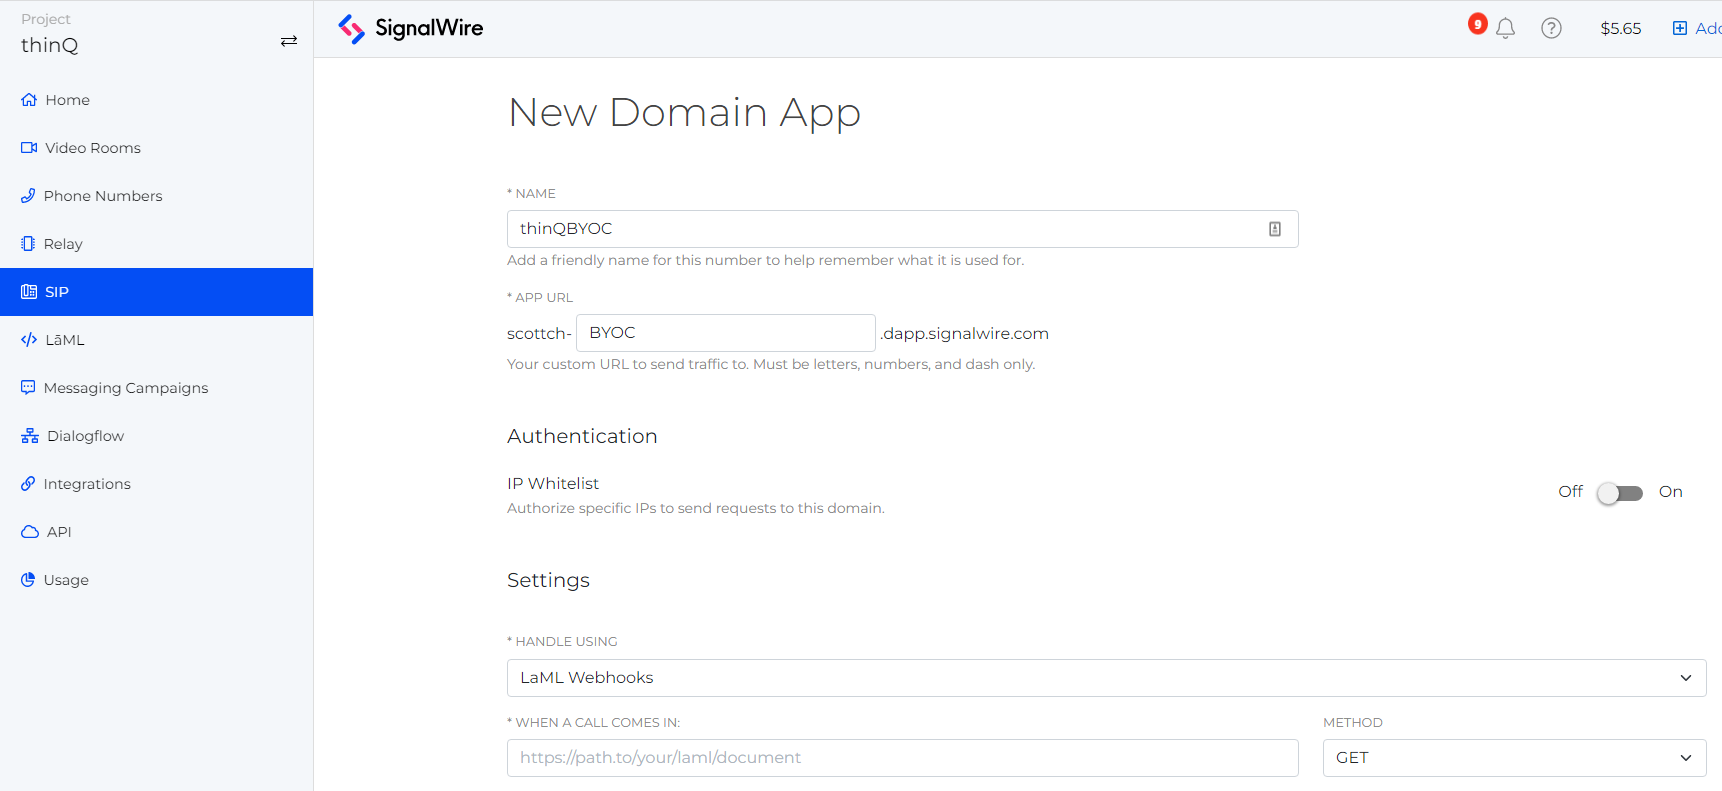 A screenshot of the New Domain App page.